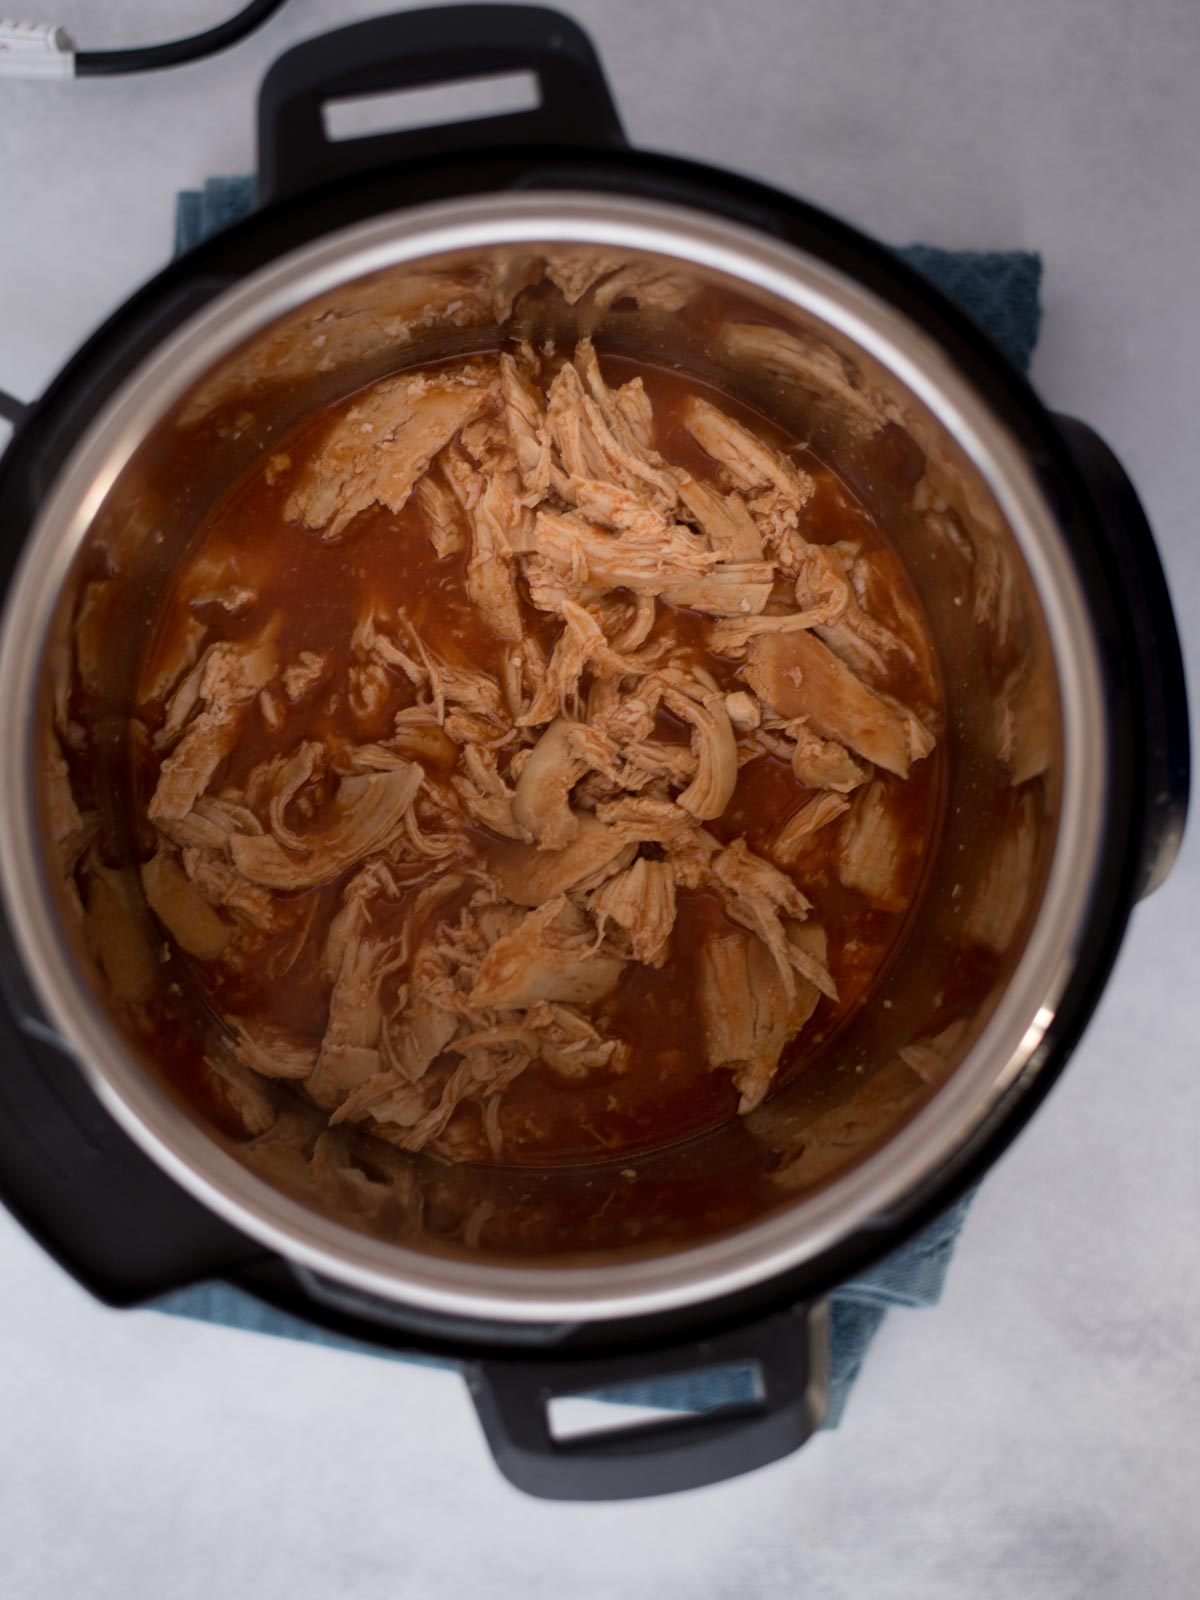 Shredded chicken inside the instant pot with buffalo sauce.